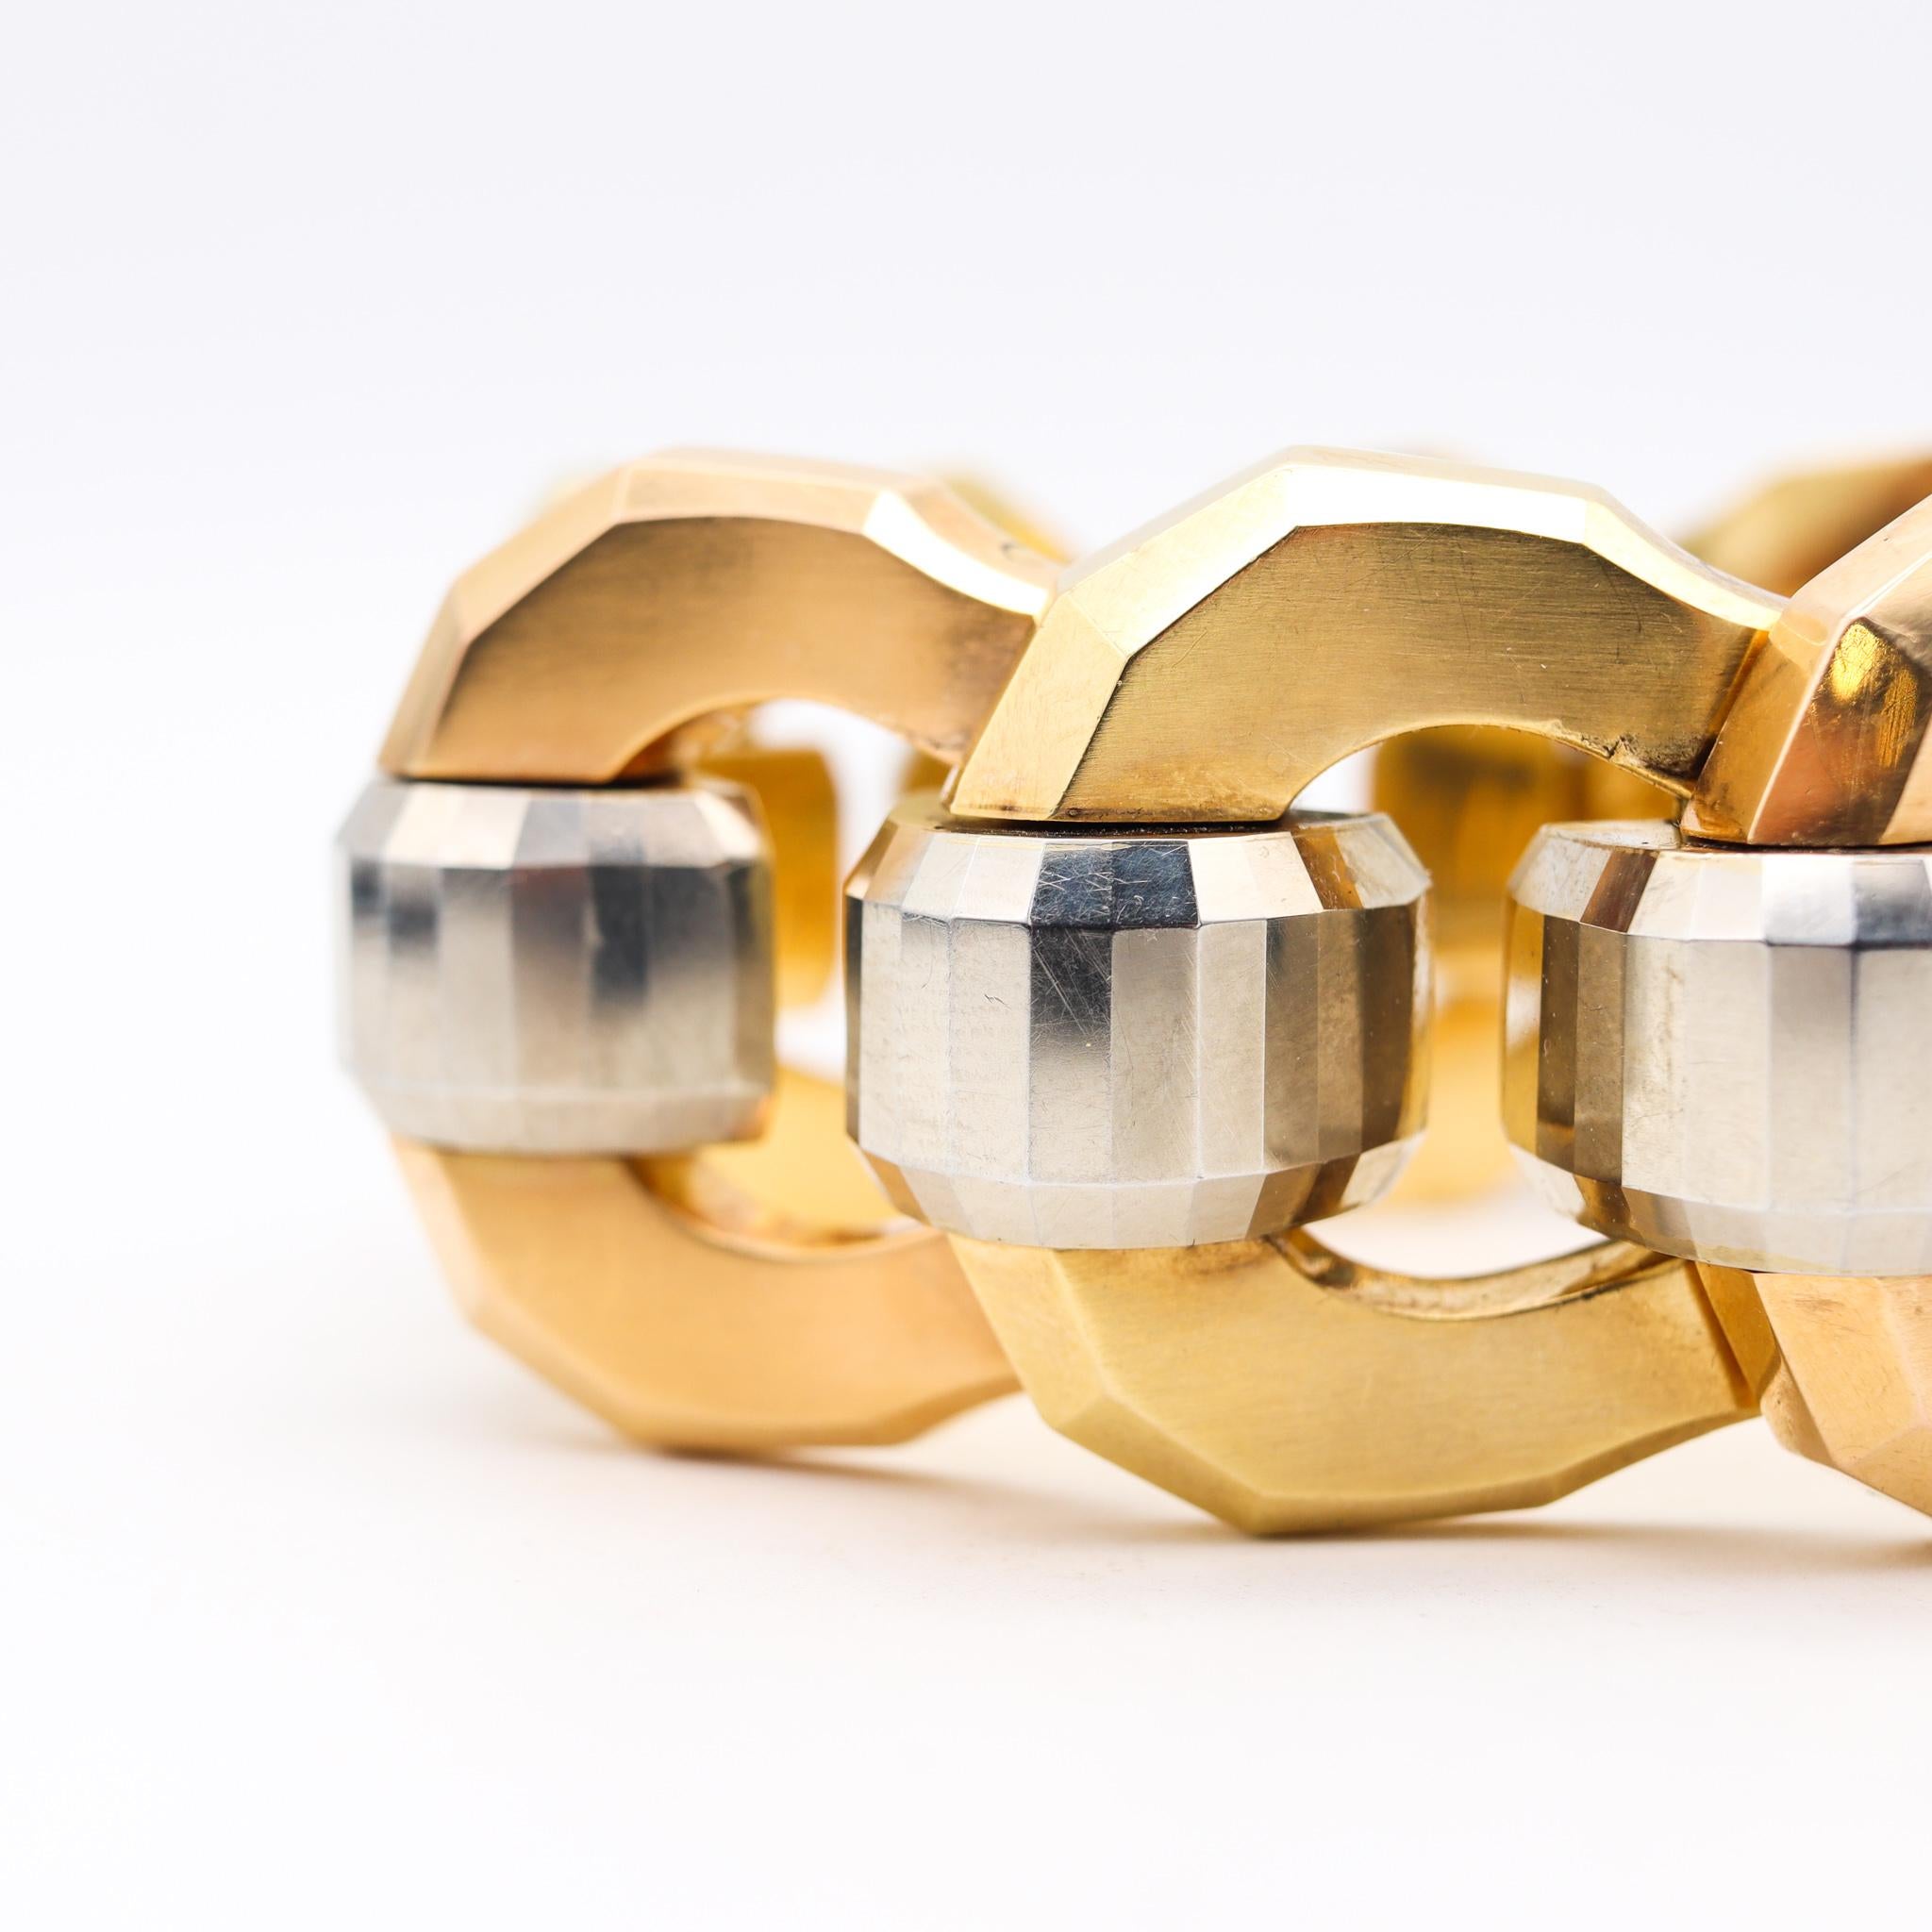 Italy, 1930, Art Deco Rare Bold Tank Bracelet in Two Tones of Faceted 18Kt Gold 5